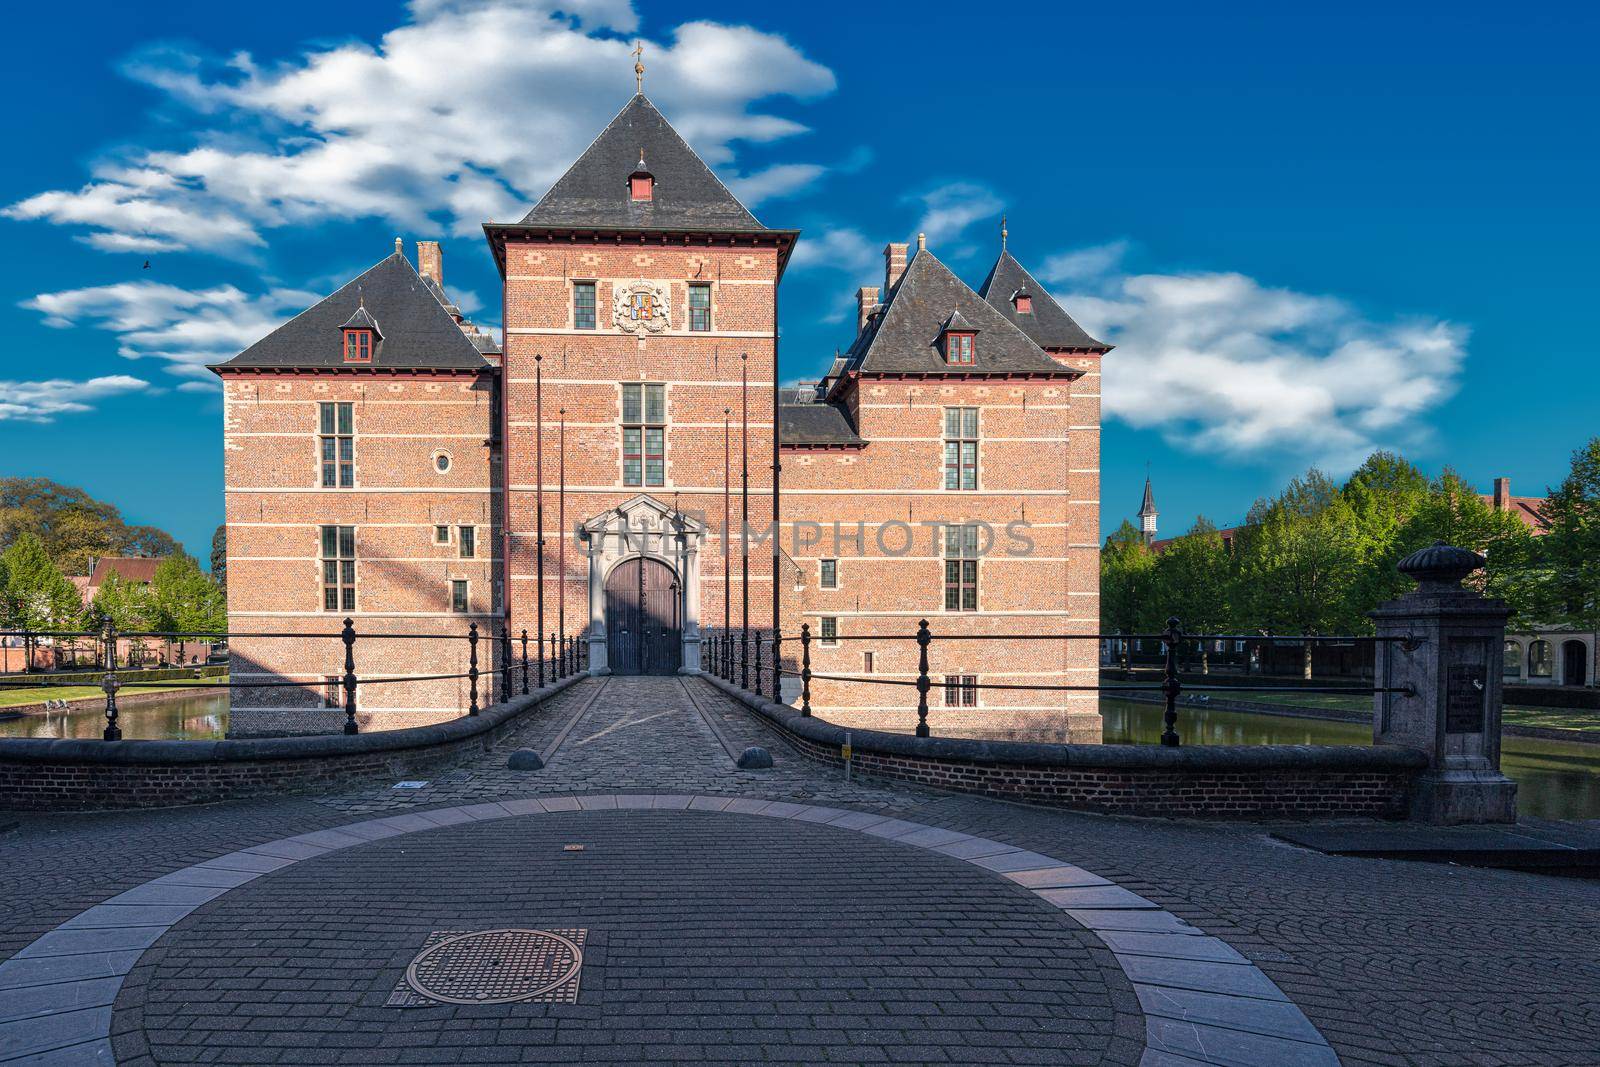 Turnhout Castle, known Castle of the Dukes of Brabant, lies in the center of the town by the same name, in the province of Antwerp in the Flemish region in Belgium.